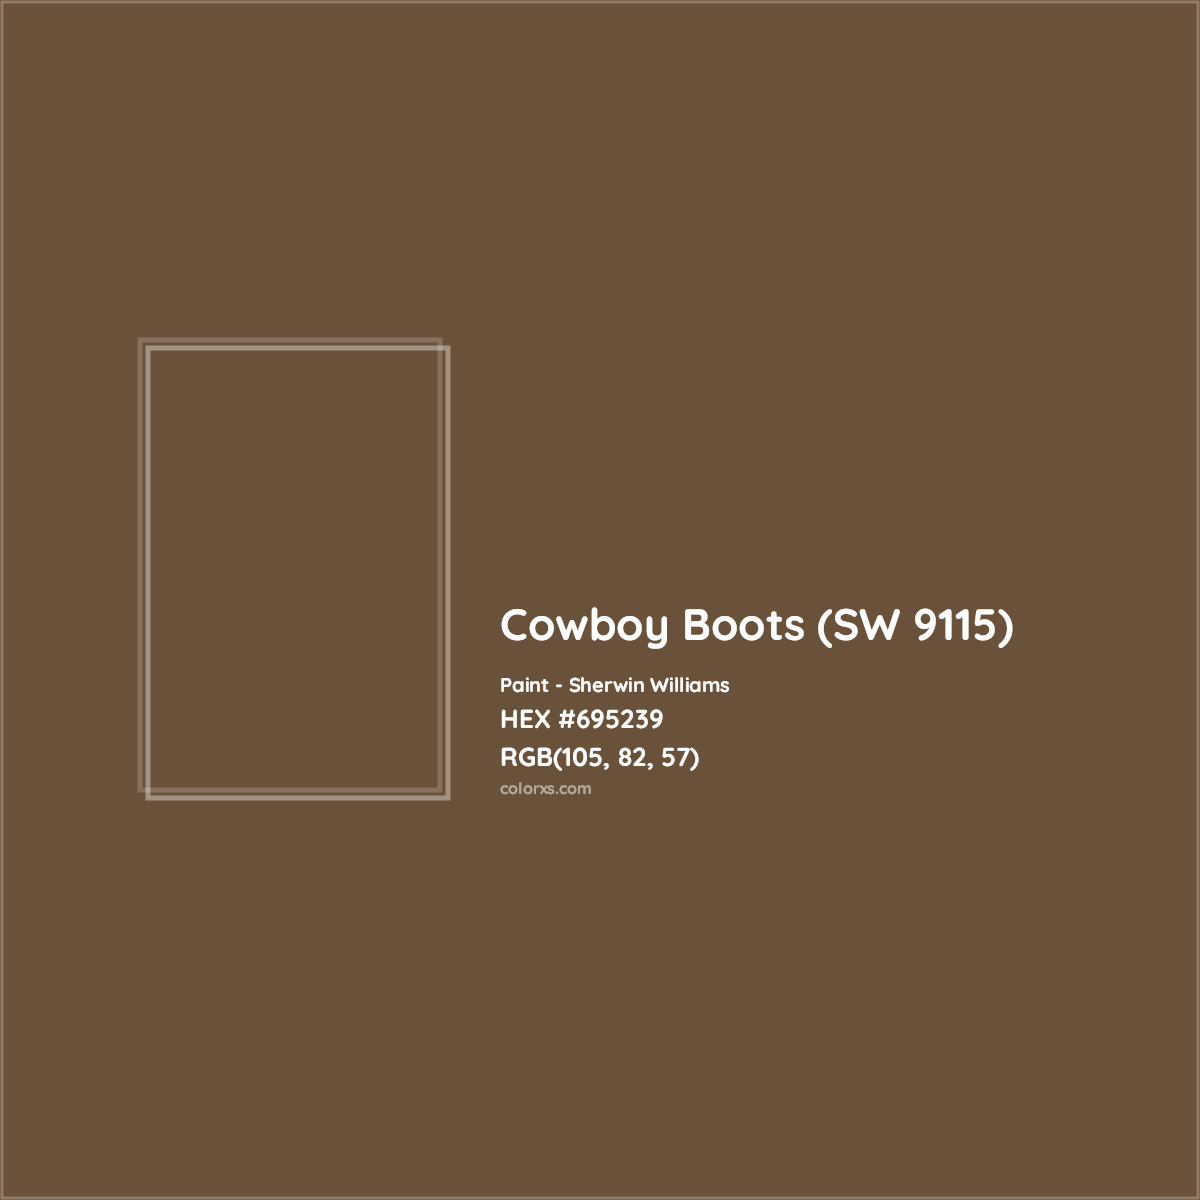 HEX #695239 Cowboy Boots (SW 9115) Paint Sherwin Williams - Color Code